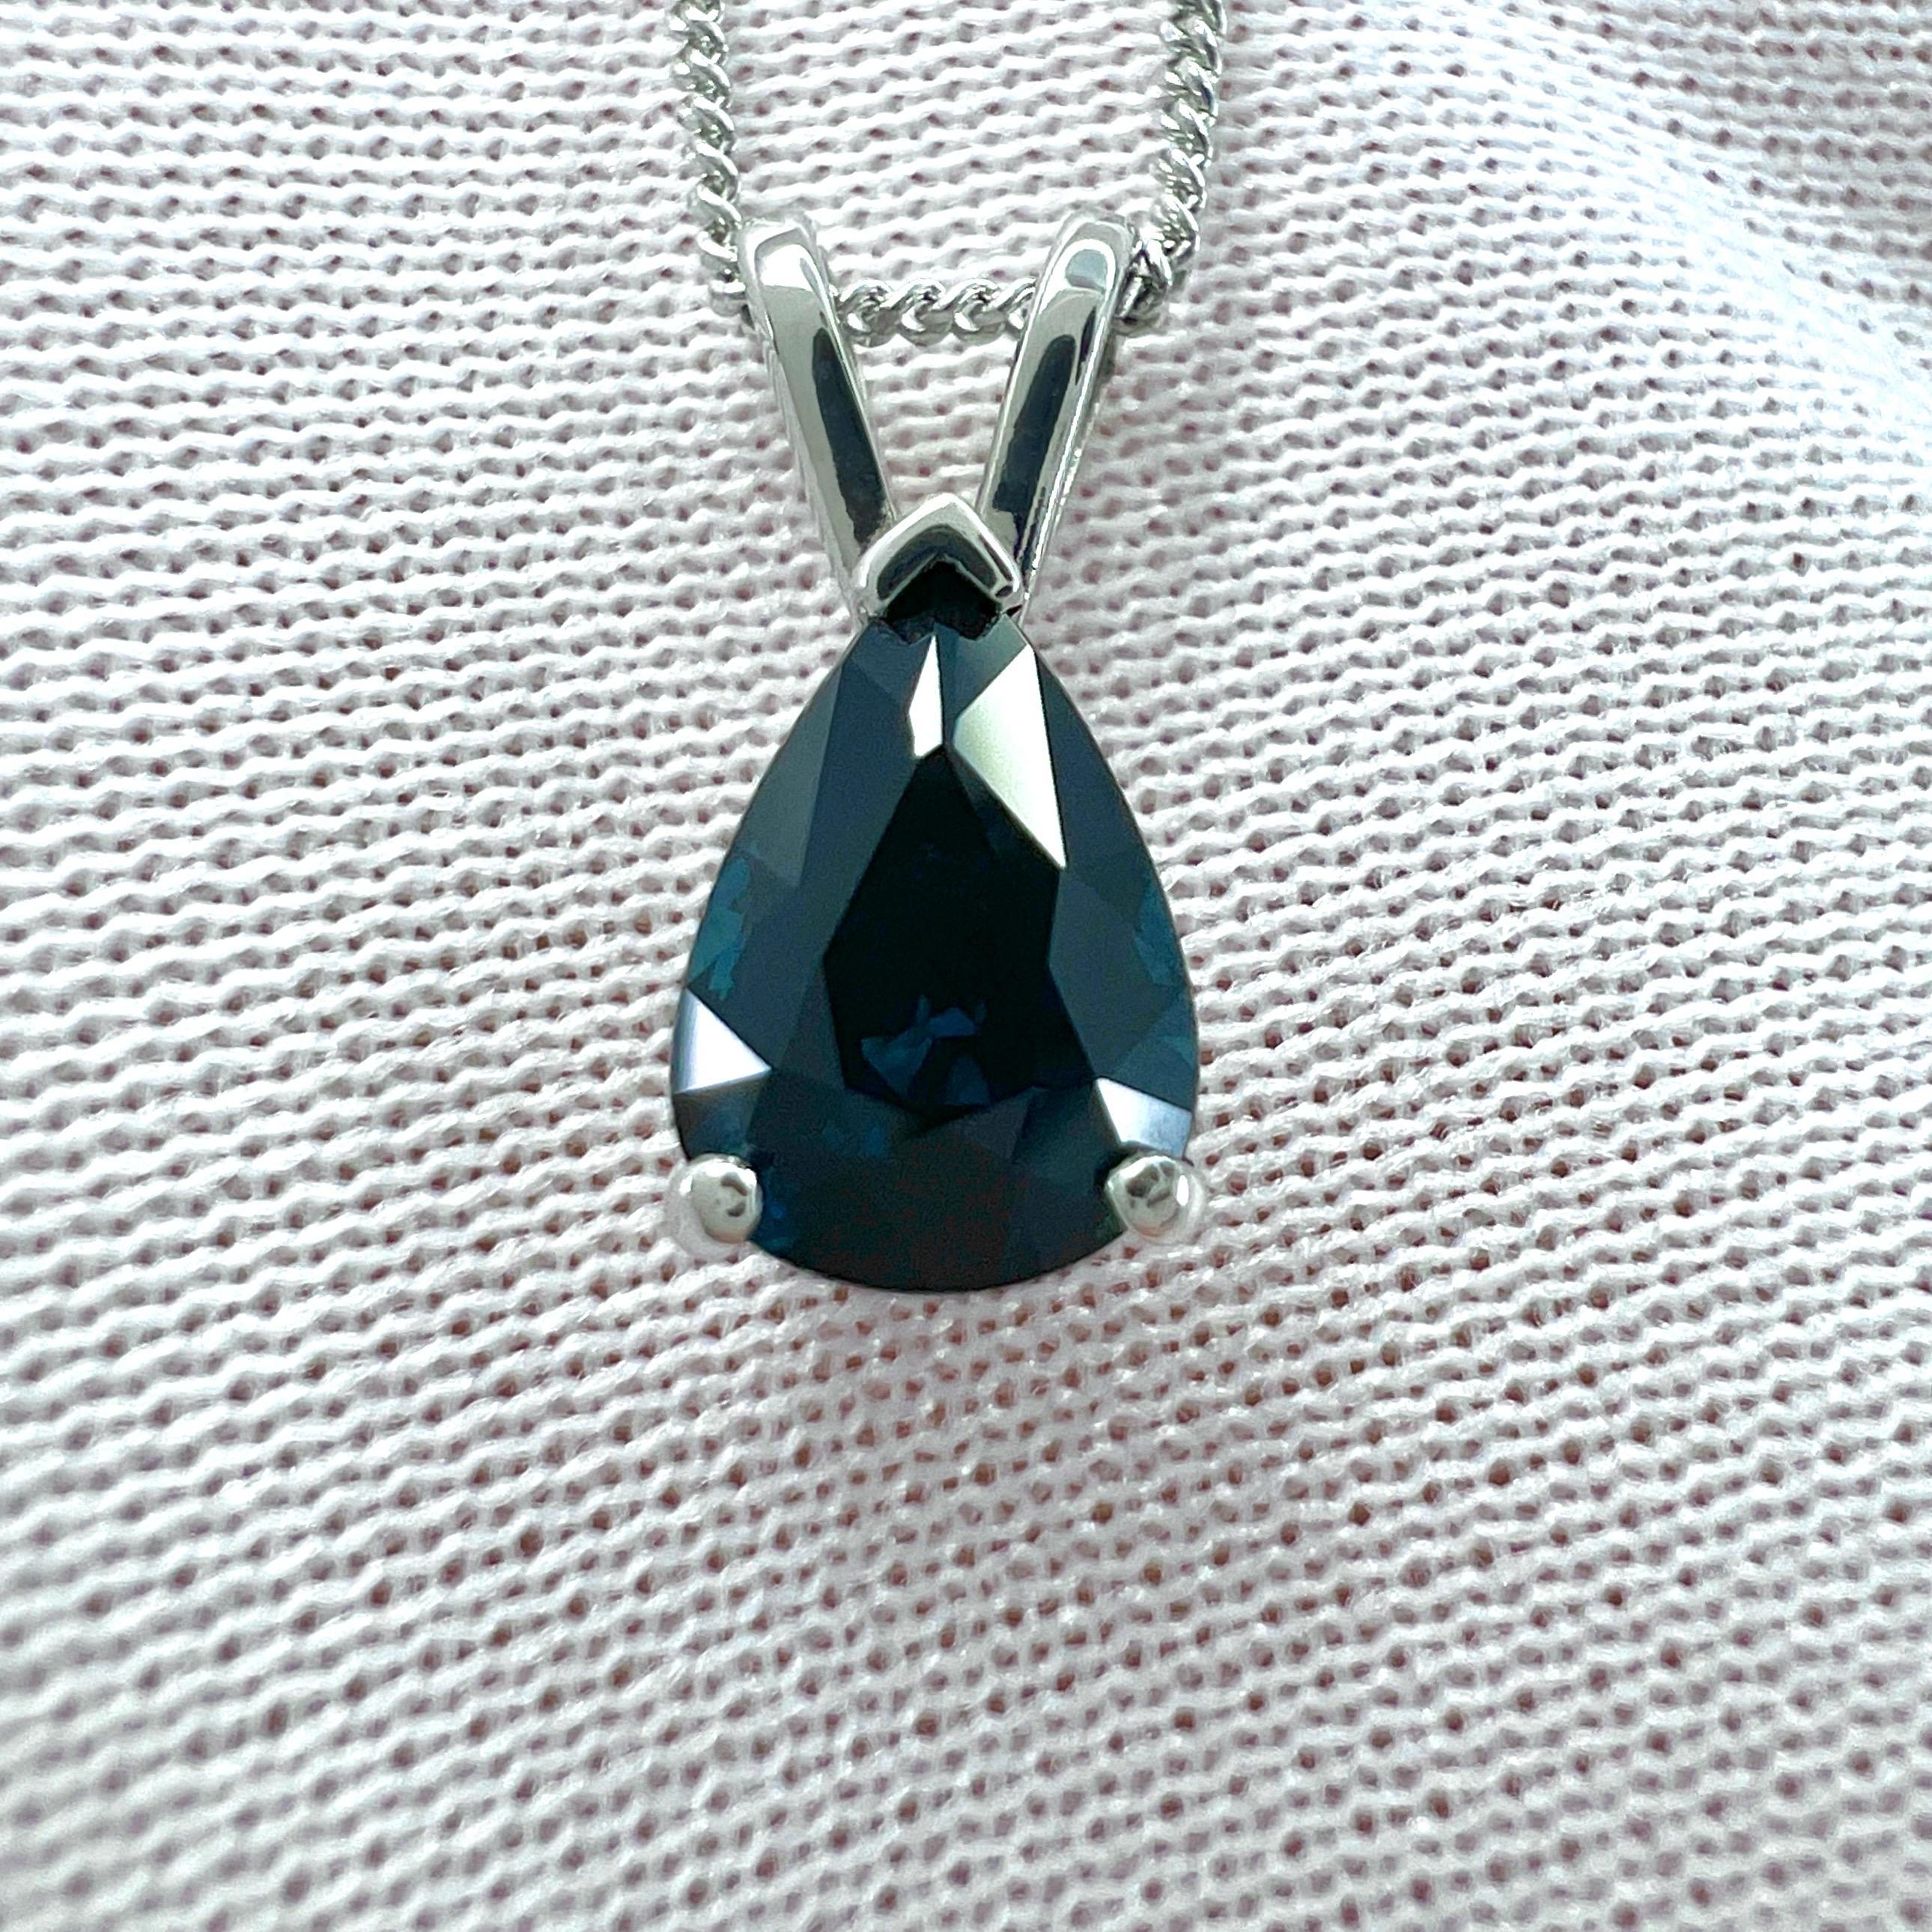 GIA Certified Untreated Deep Blue Sapphire 18k White Gold Pendant Necklace.

1.17 Carat blue sapphire with a fine deep blue colour and excellent clarity. Very clean stone.
Totally untreated and unheated, very rare for natural sapphires. Confirmed on